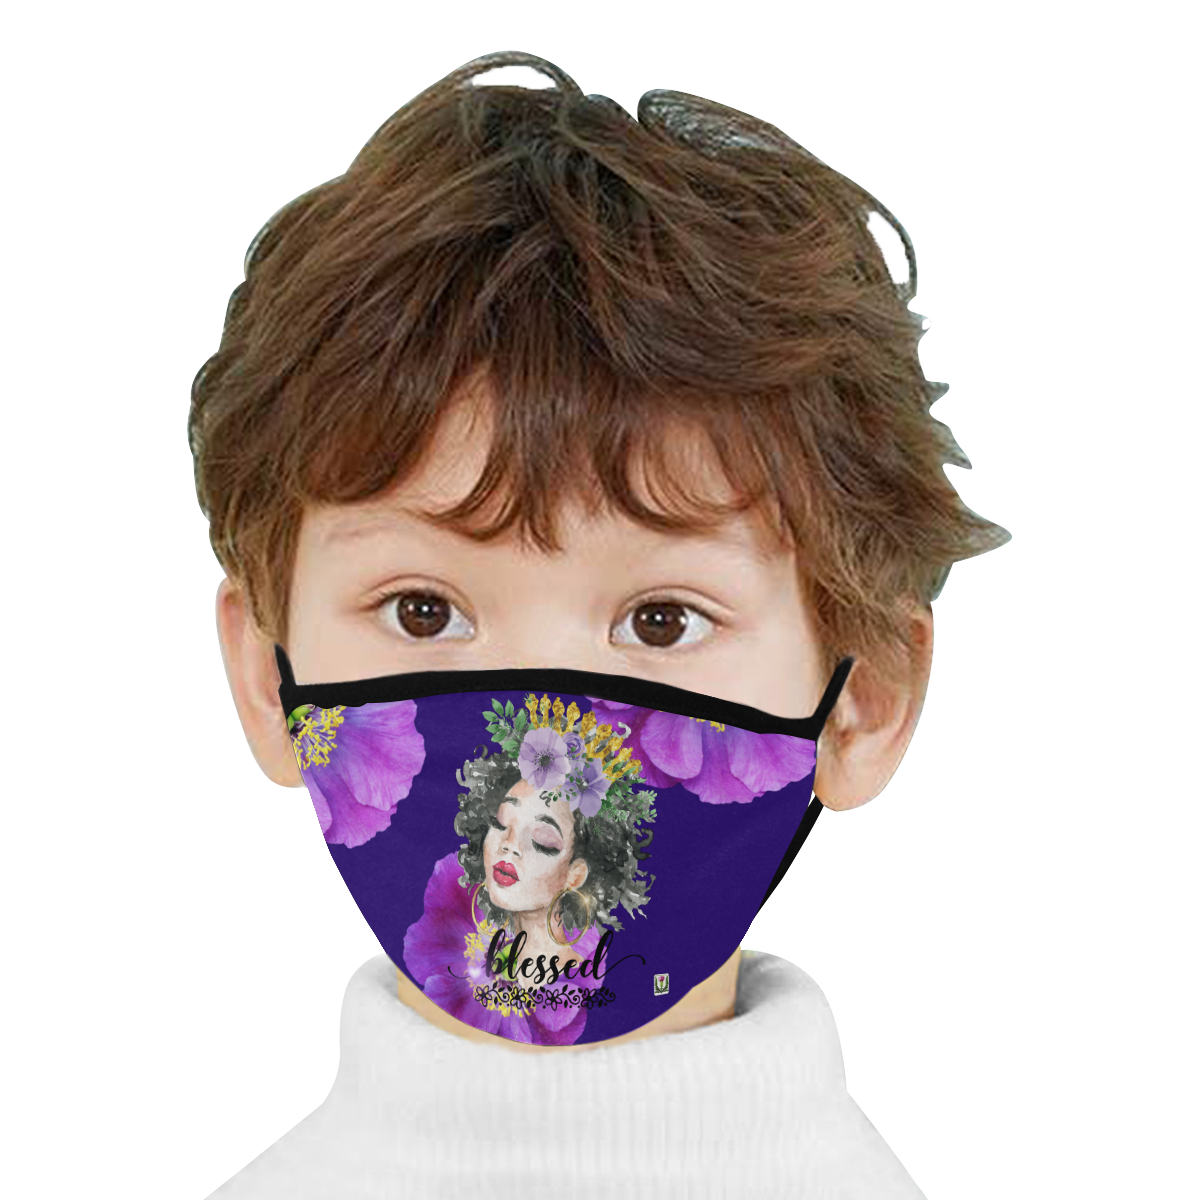 Fairlings Delight's The Word Collection- Blessed 53086a5 Mouth Mask